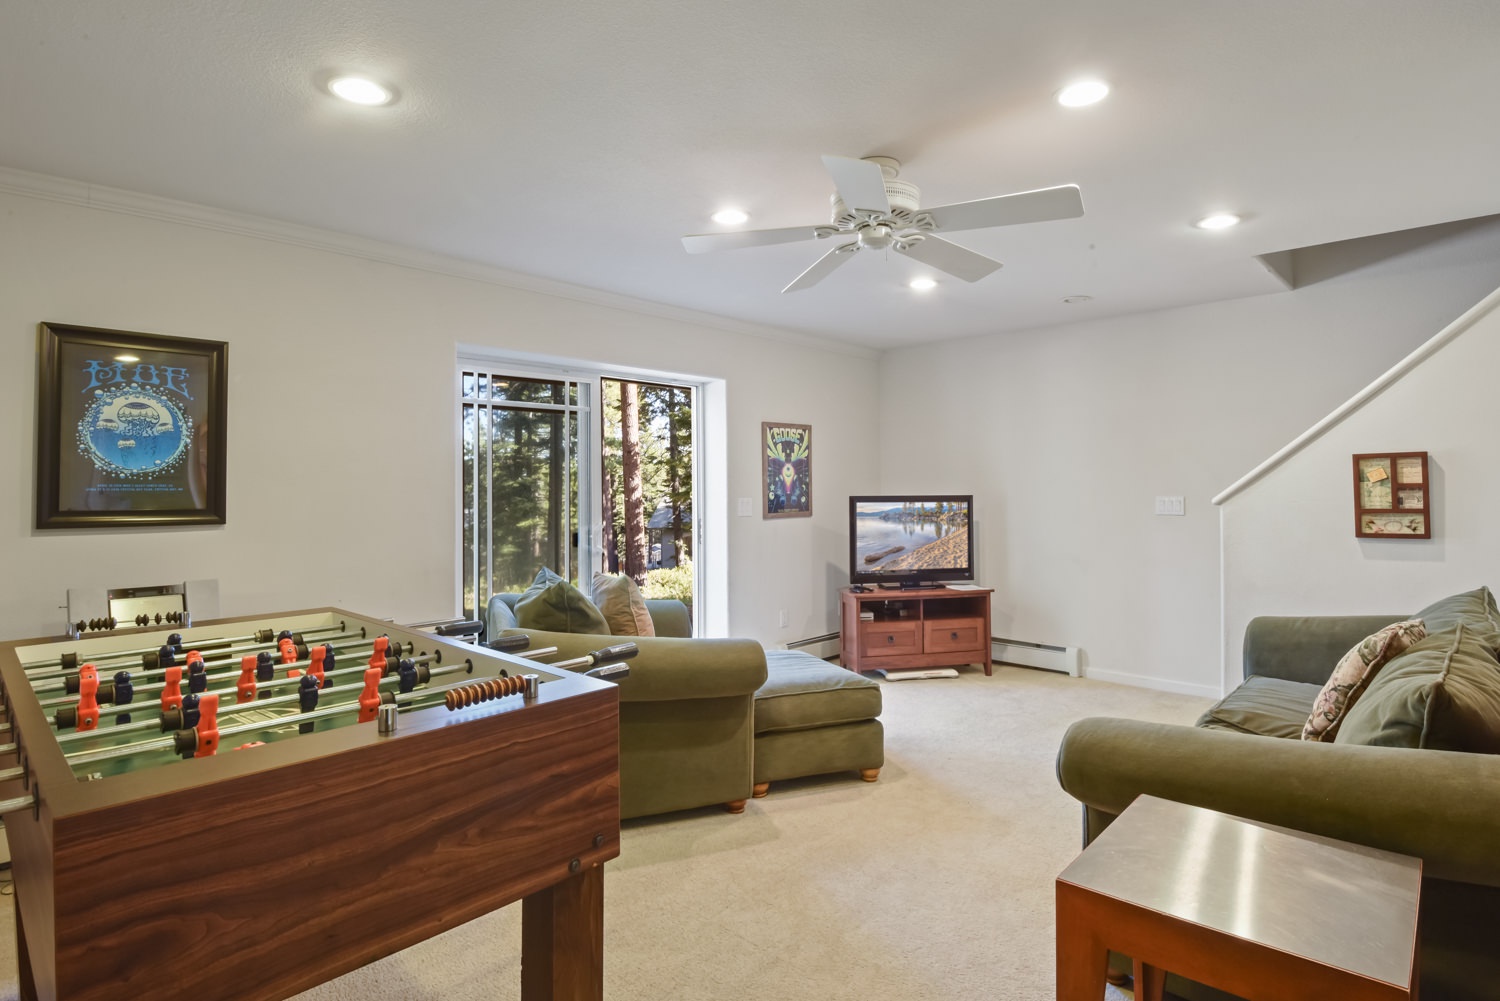 Game Room with Foosball table